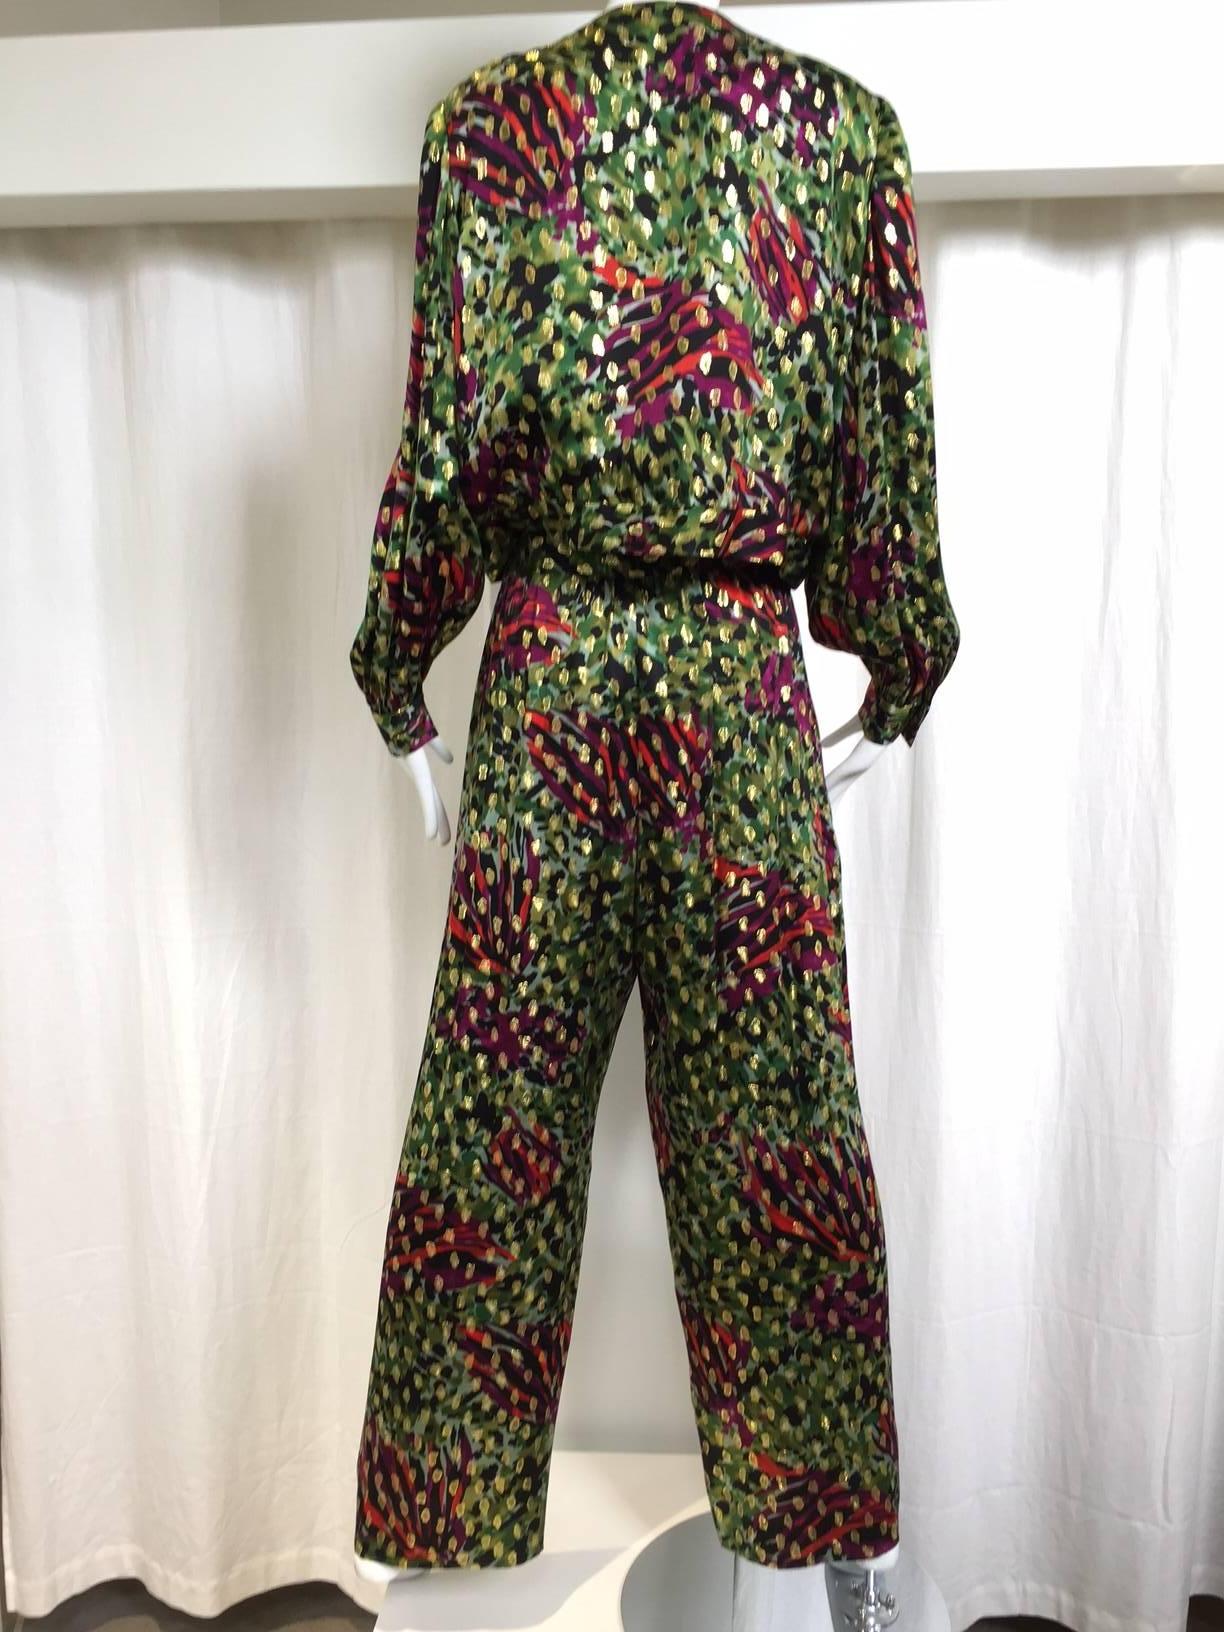 1980s Givenchy Silk lame jacket/blouse in green, gold, red and fuschia print.
You can wear it as a blouse by moving the hook and eye on the jacket. ( see image) 
Jacket/ blouse : 46